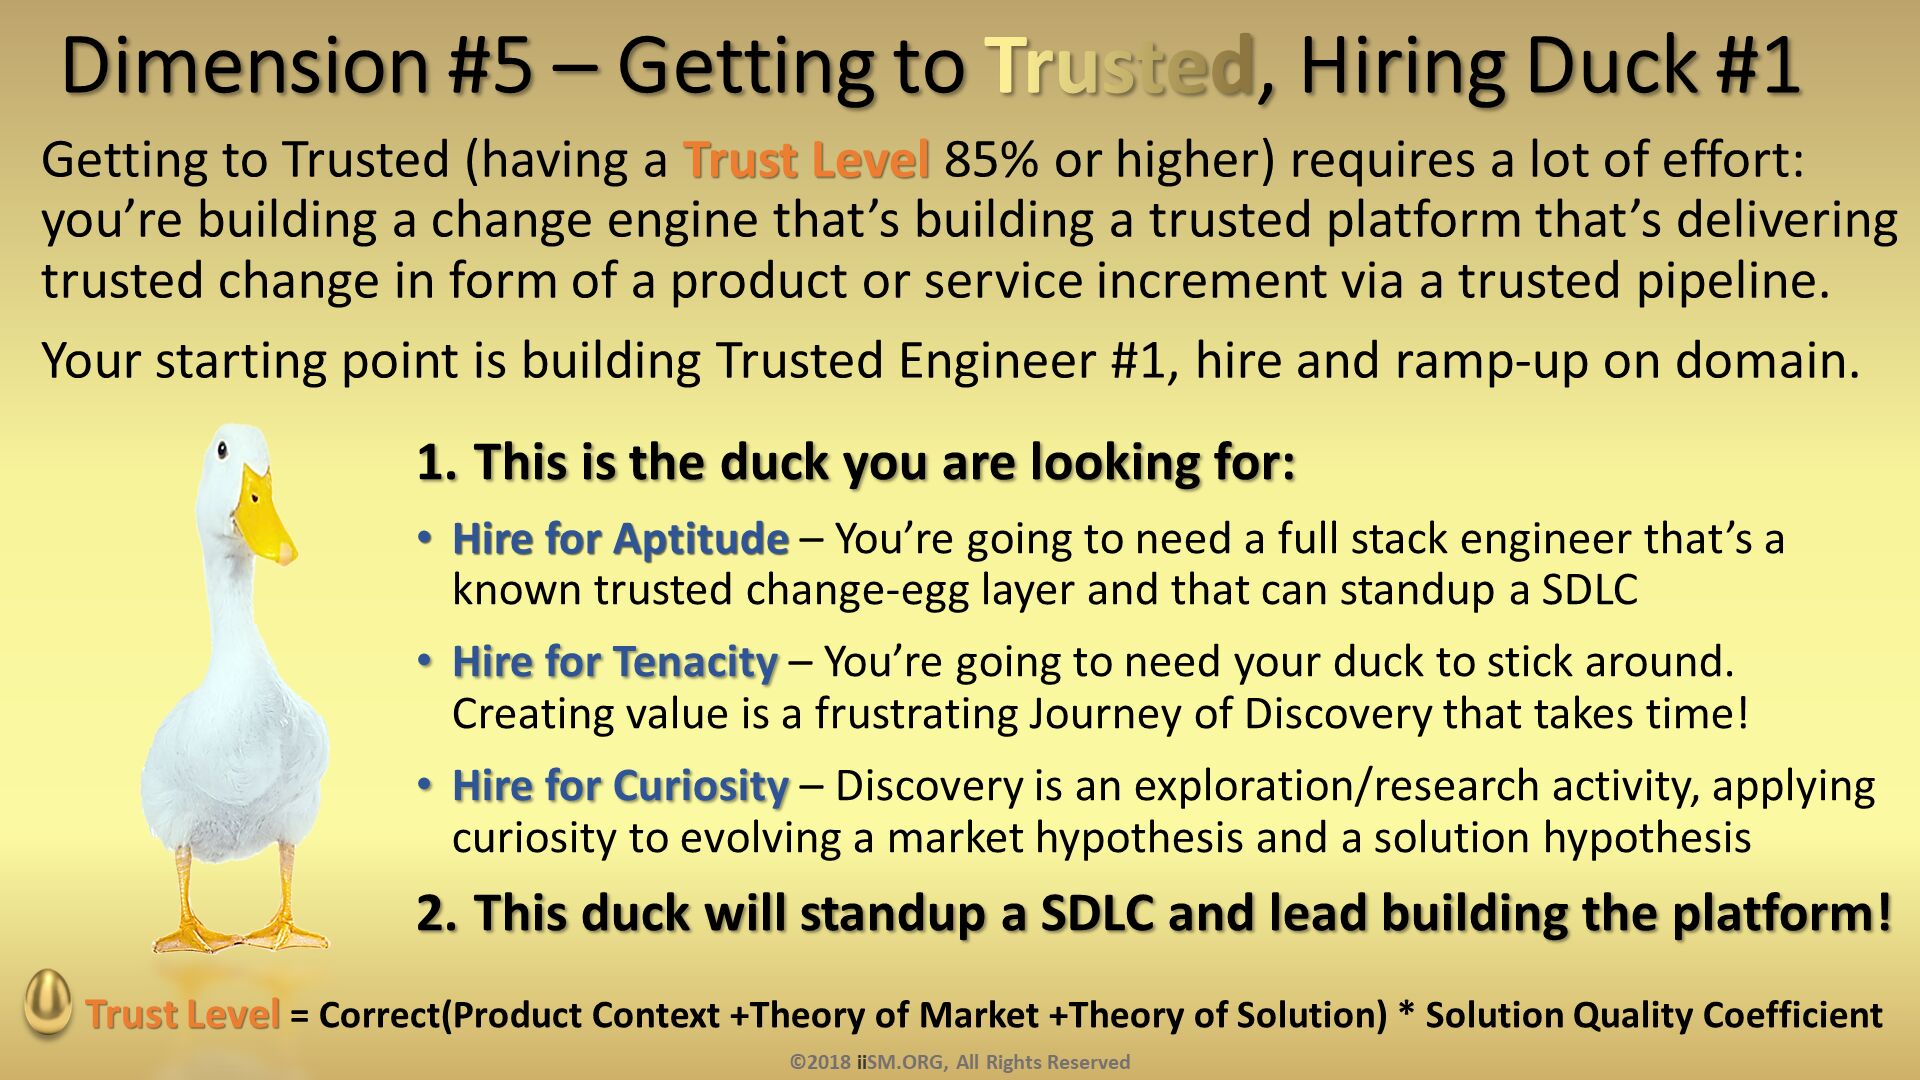 Dimension #5 – Getting to Trusted, Hiring Duck #1. Getting to Trusted (having a Trust Level 85% or higher) requires a lot of effort: you’re building a change engine that’s building a trusted platform that’s delivering trusted change in form of a product or service increment via a trusted pipeline.  
Your starting point is building Trusted Engineer #1, hire and ramp-up on domain. . This is the duck you are looking for:
Hire for Aptitude – You’re going to need a full stack engineer that’s a known trusted change-egg layer and that can standup a SDLC
Hire for Tenacity – You’re going to need your duck to stick around.  Creating value is a frustrating Journey of Discovery that takes time!
Hire for Curiosity – Discovery is an exploration/research activity, applying curiosity to evolving a market hypothesis and a solution hypothesis
This duck will standup a SDLC and lead building the platform!. Trust Level = Correct(Product Context +Theory of Market +Theory of Solution) * Solution Quality Coefficient
. ©2018 iiSM.ORG, All Rights Reserved. 